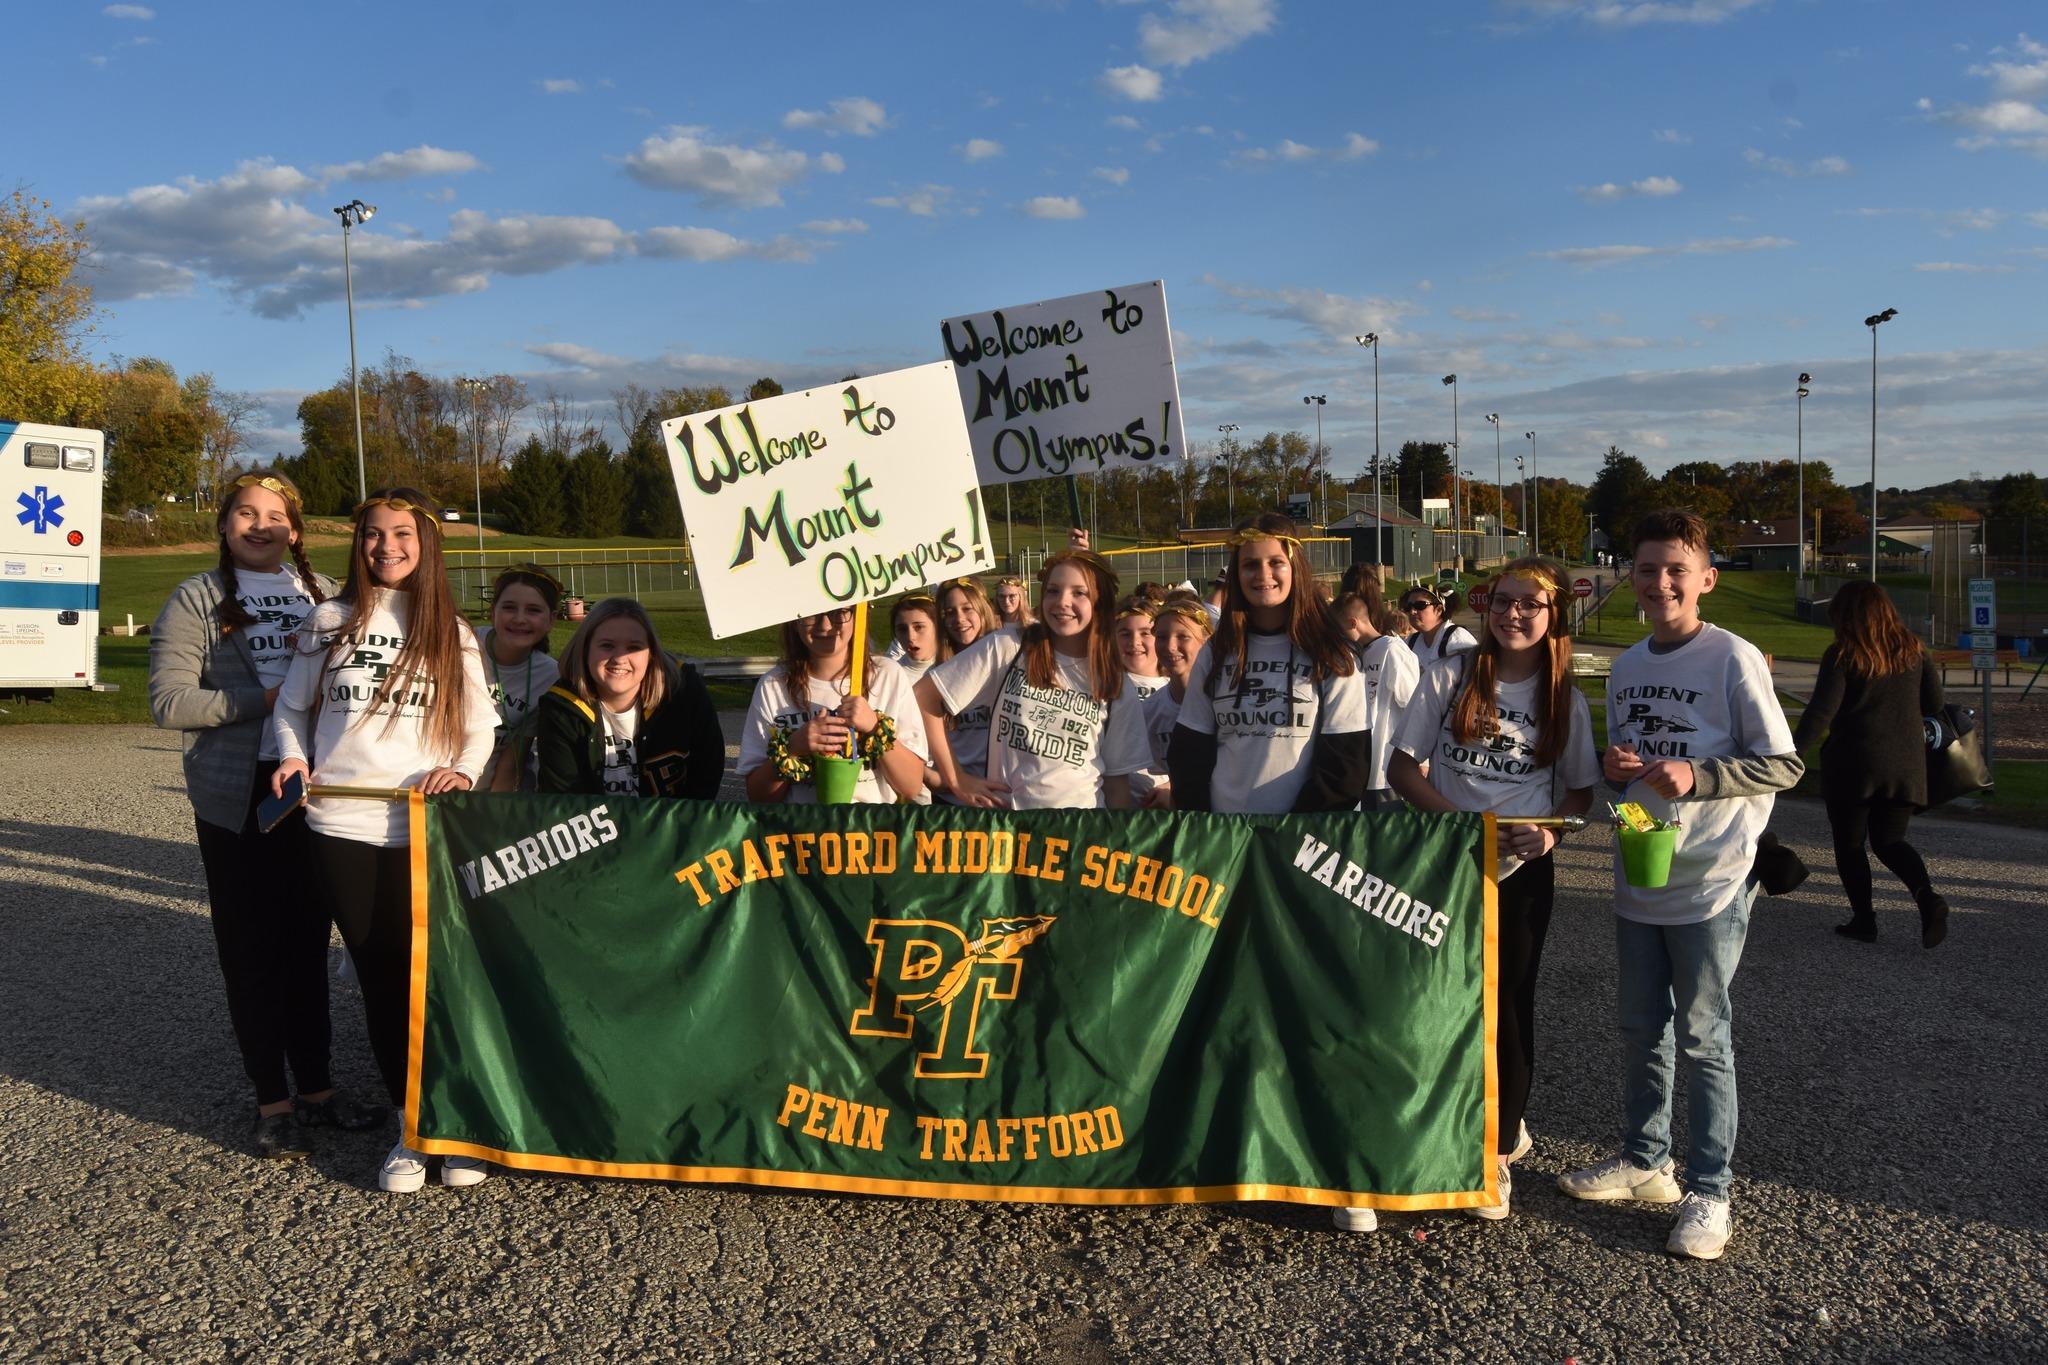 The Trafford Middle School student council participated in the parade